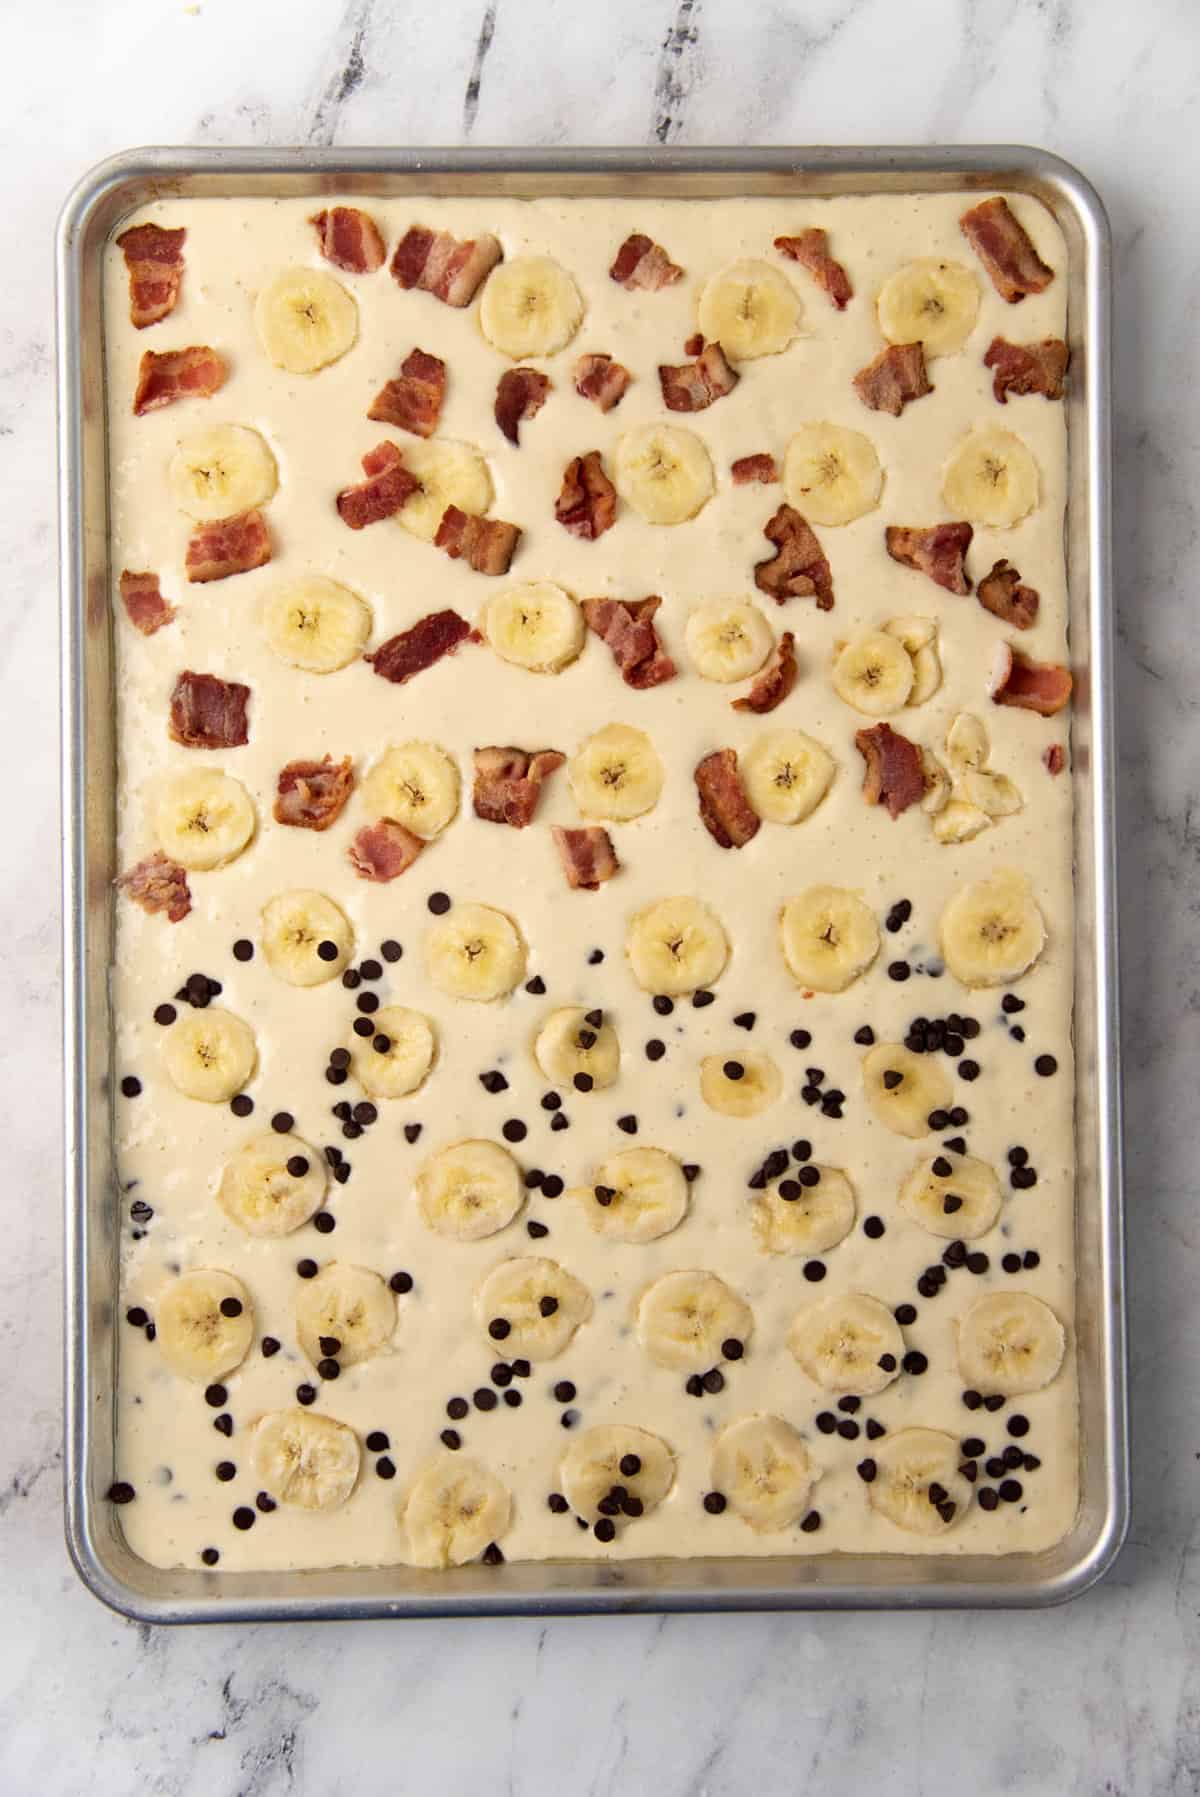 An overhead view of the pancake batter spread evenly on a half sheet pan, with sliced banana and bacon on one half, and banana chocolate chip on the other half.